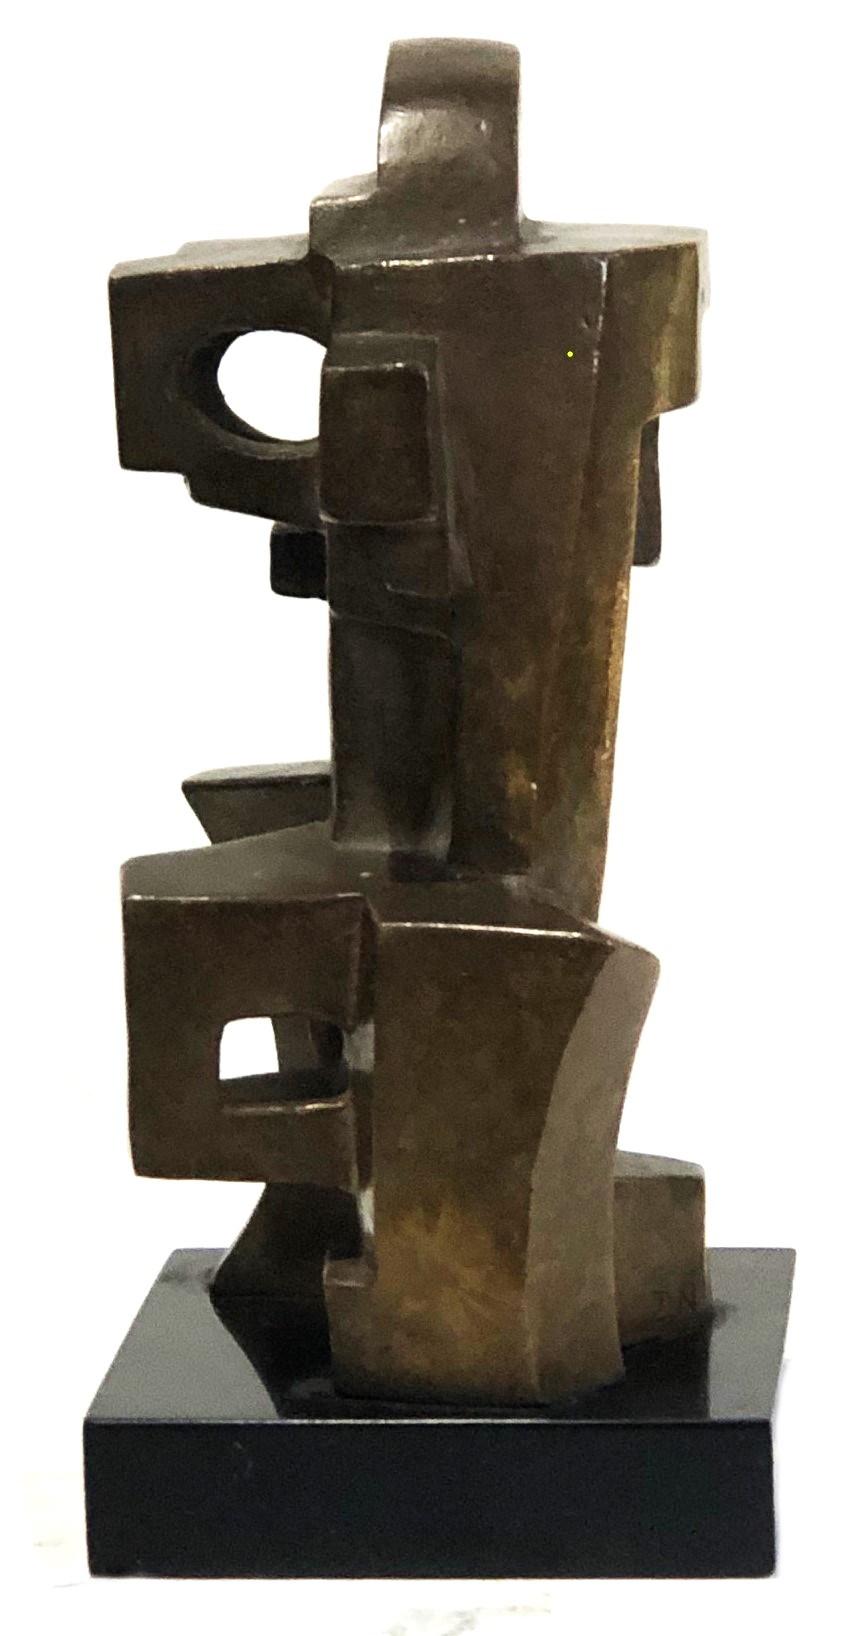 Vintage
Abstract Cubist Sculpture
Bronze  Granite
XX Century

DIMENSIONS
Height: 7 inches            Width: 3-3/8 inches                  Depth: 3-3/8 inches

ABOUT
This is a brilliant example of a cubist sculpture, fully confirming the opinion that